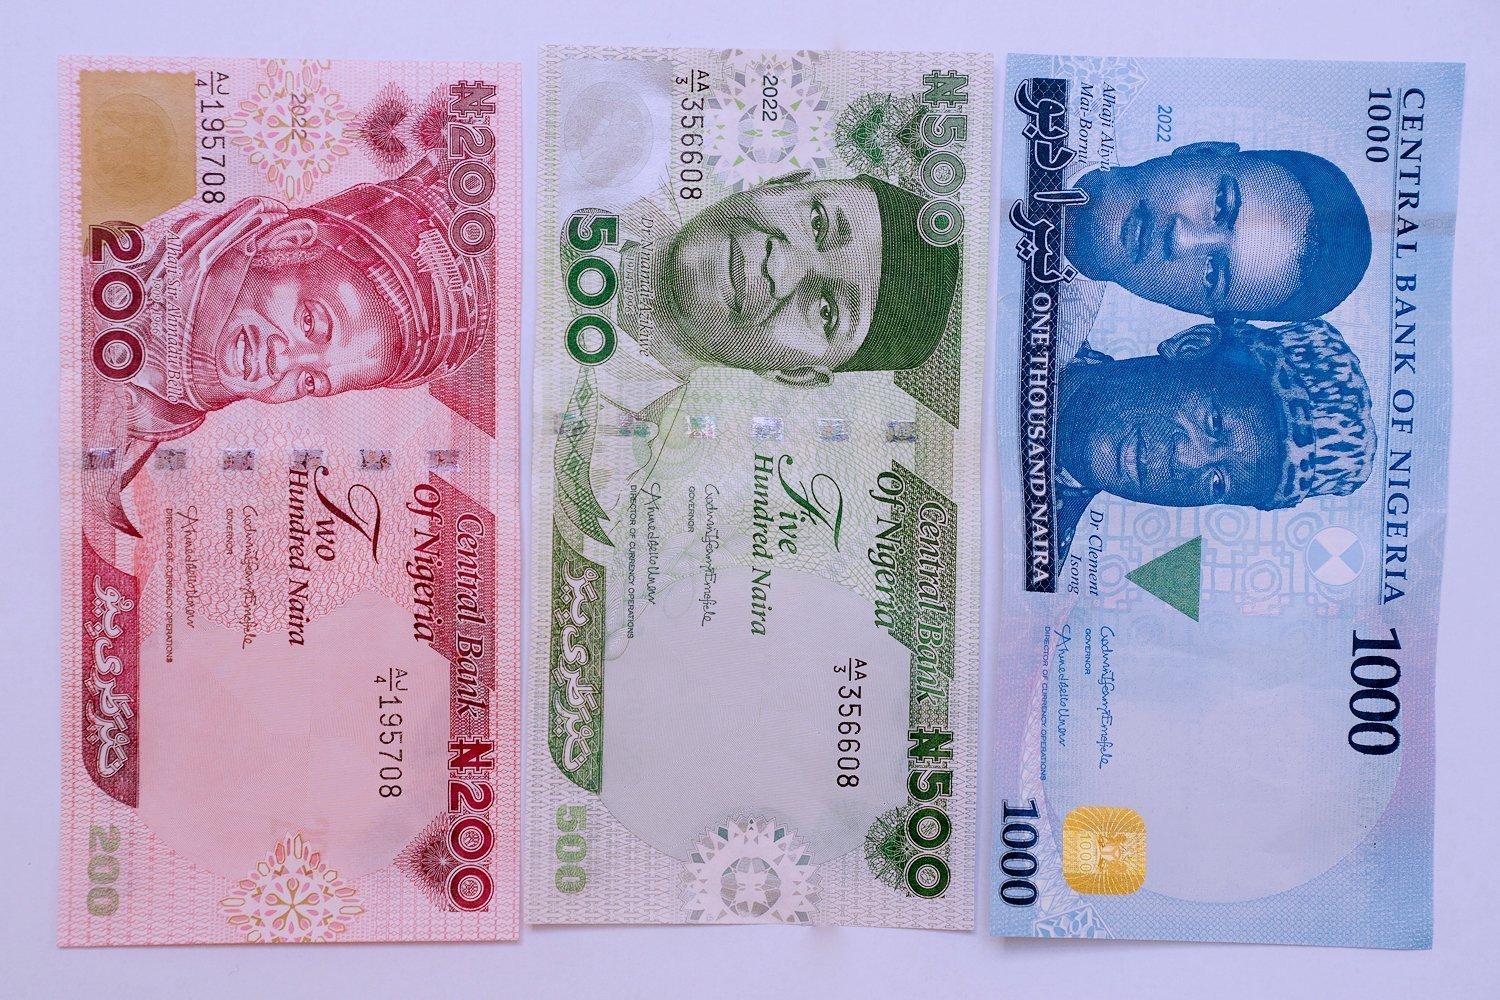 Too much suffering – Nigerians lament scarcity of new currency notes